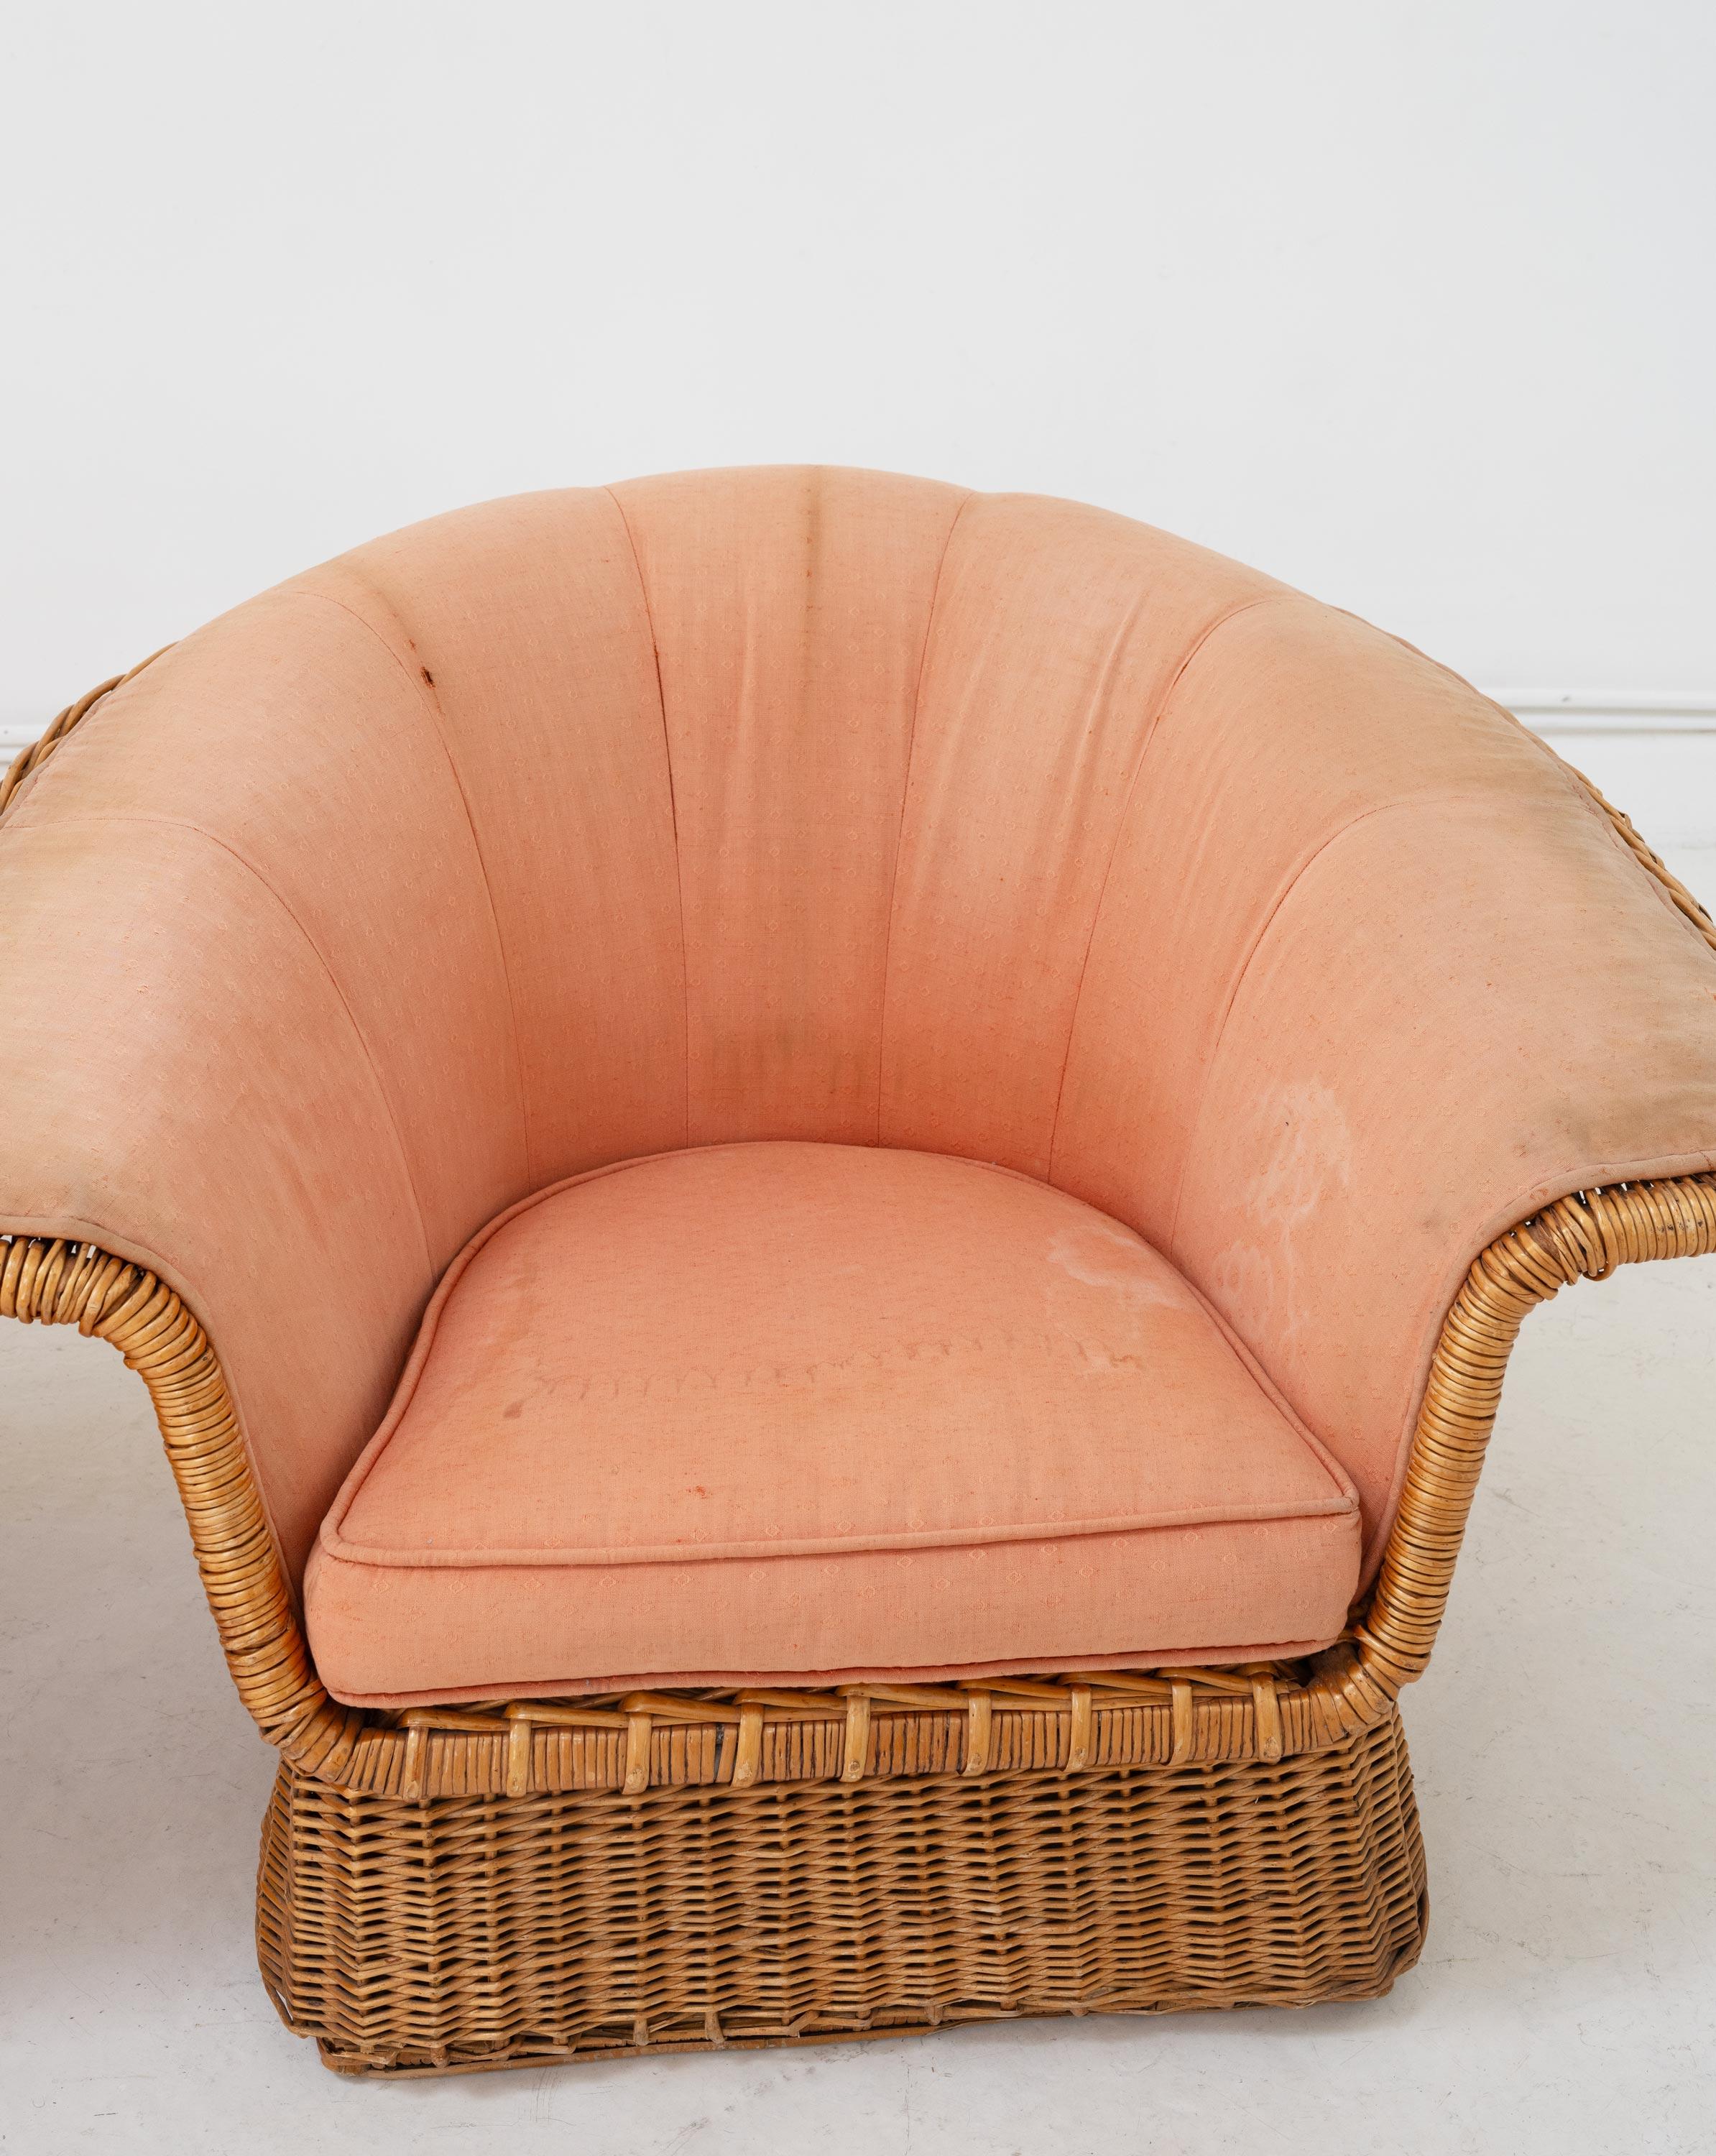 American A Pair of Wicker Armchairs by Lyda Levi for McGuire, c.1970 For Sale